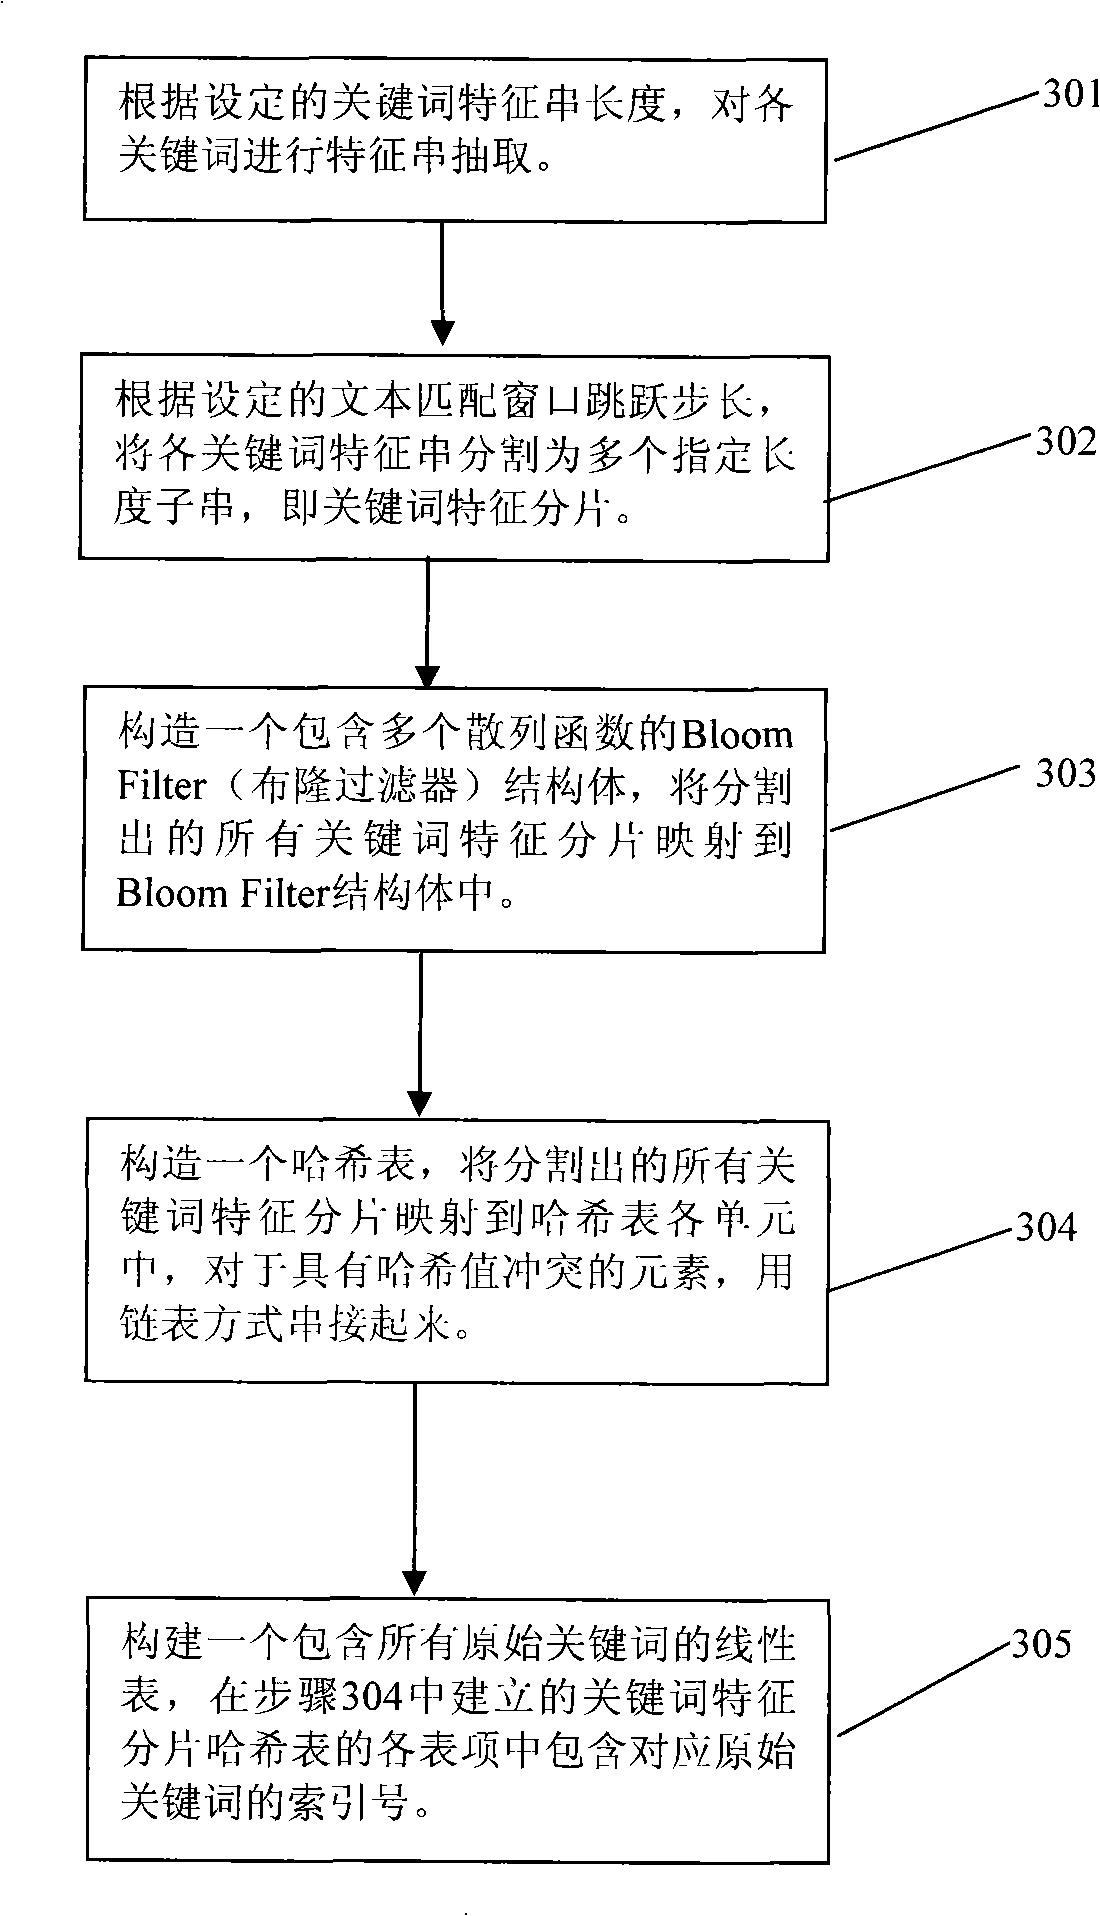 Multi-key-word matching method for rapidly analyzing content